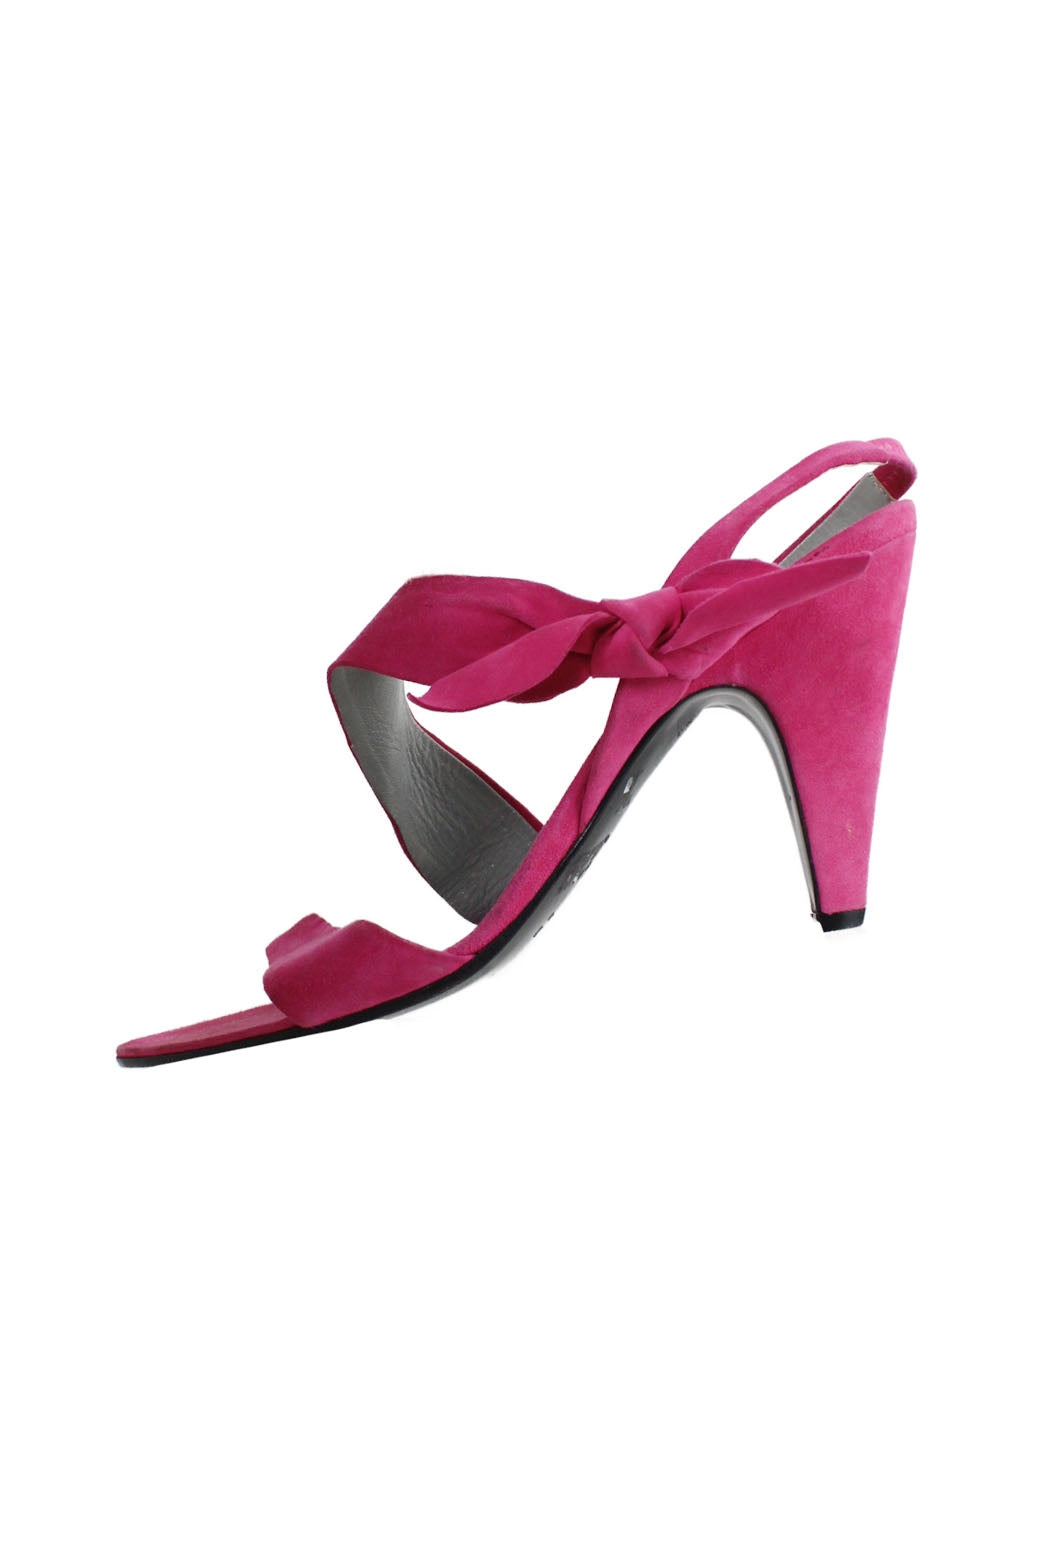  miu miu fuchsia leather slingback heels. features open toe,  branded insole, strap bow closure, ankle strap, and pointed toe silhouette. 